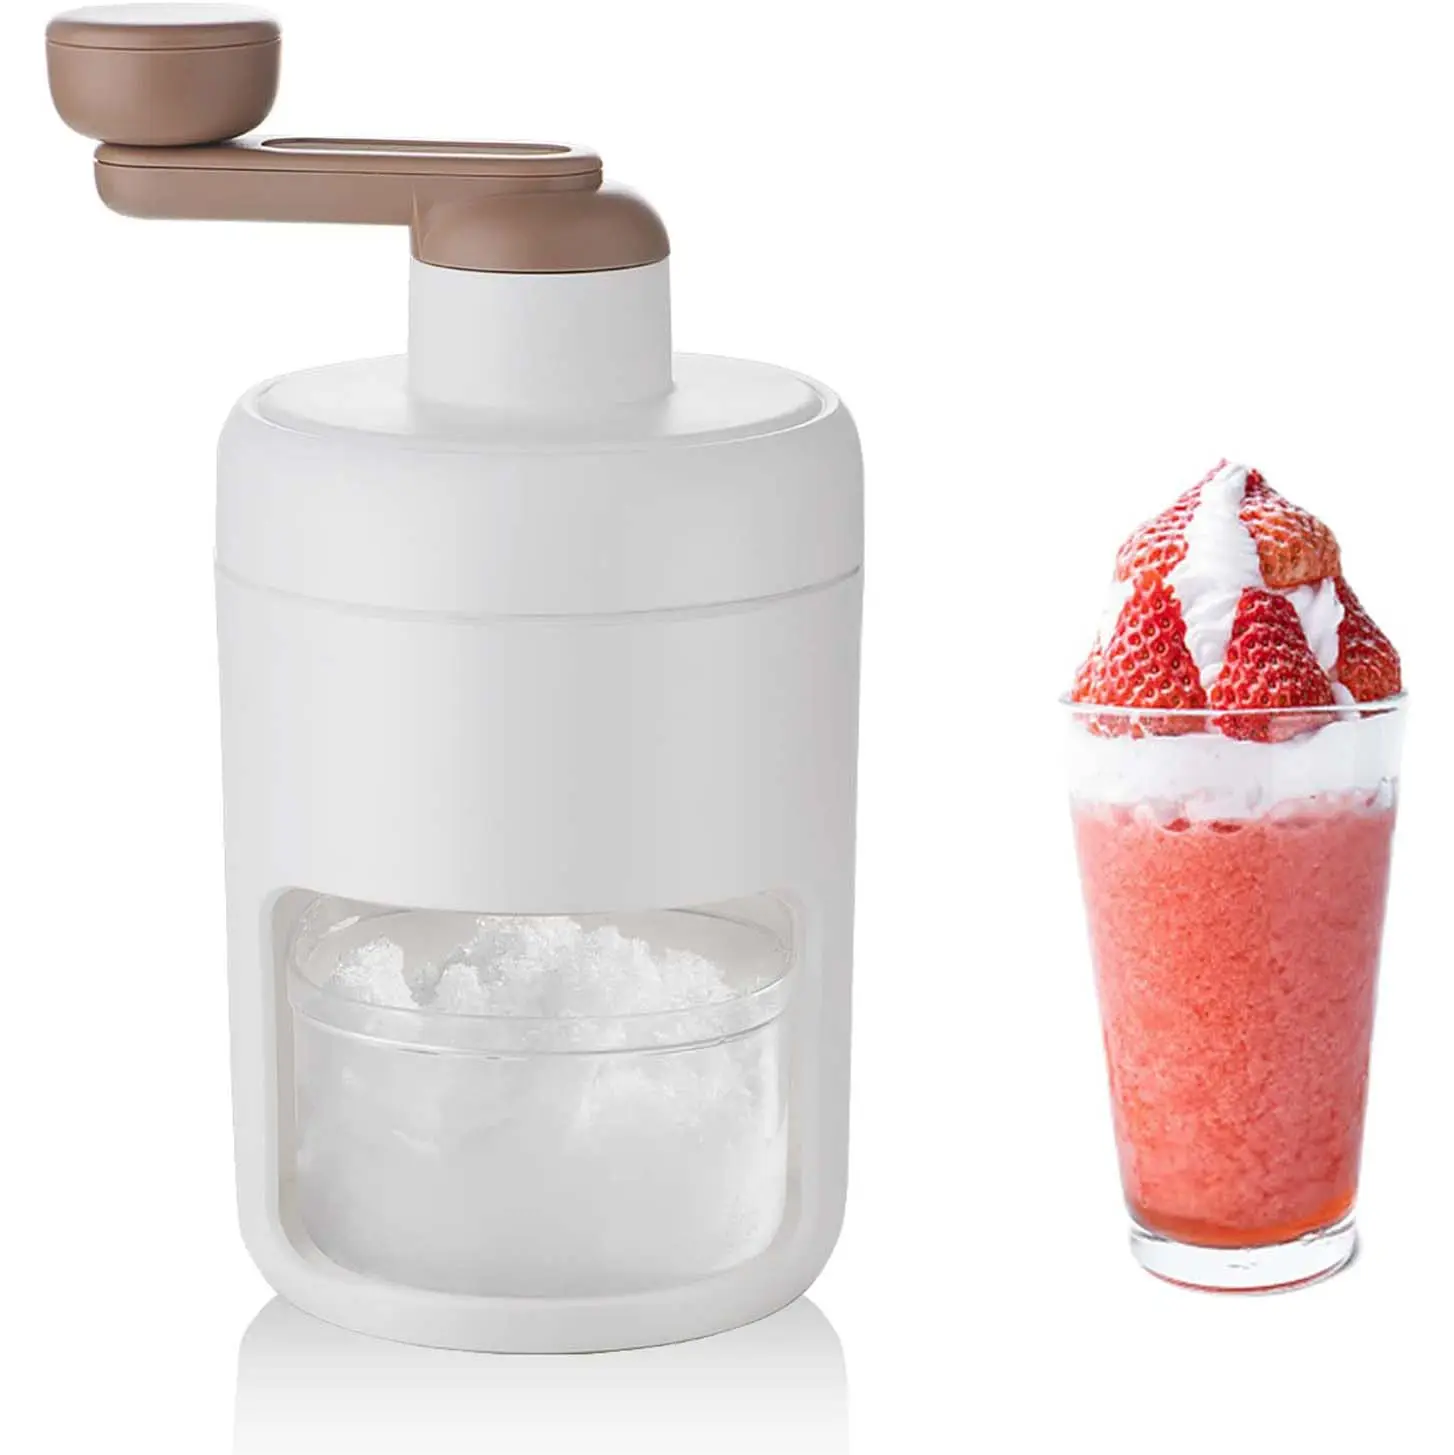 Rusher Electric Razor Hand Crank Manual Ice Shaver Small Household Smoothie Machine for Crushed Ice for Summer Use